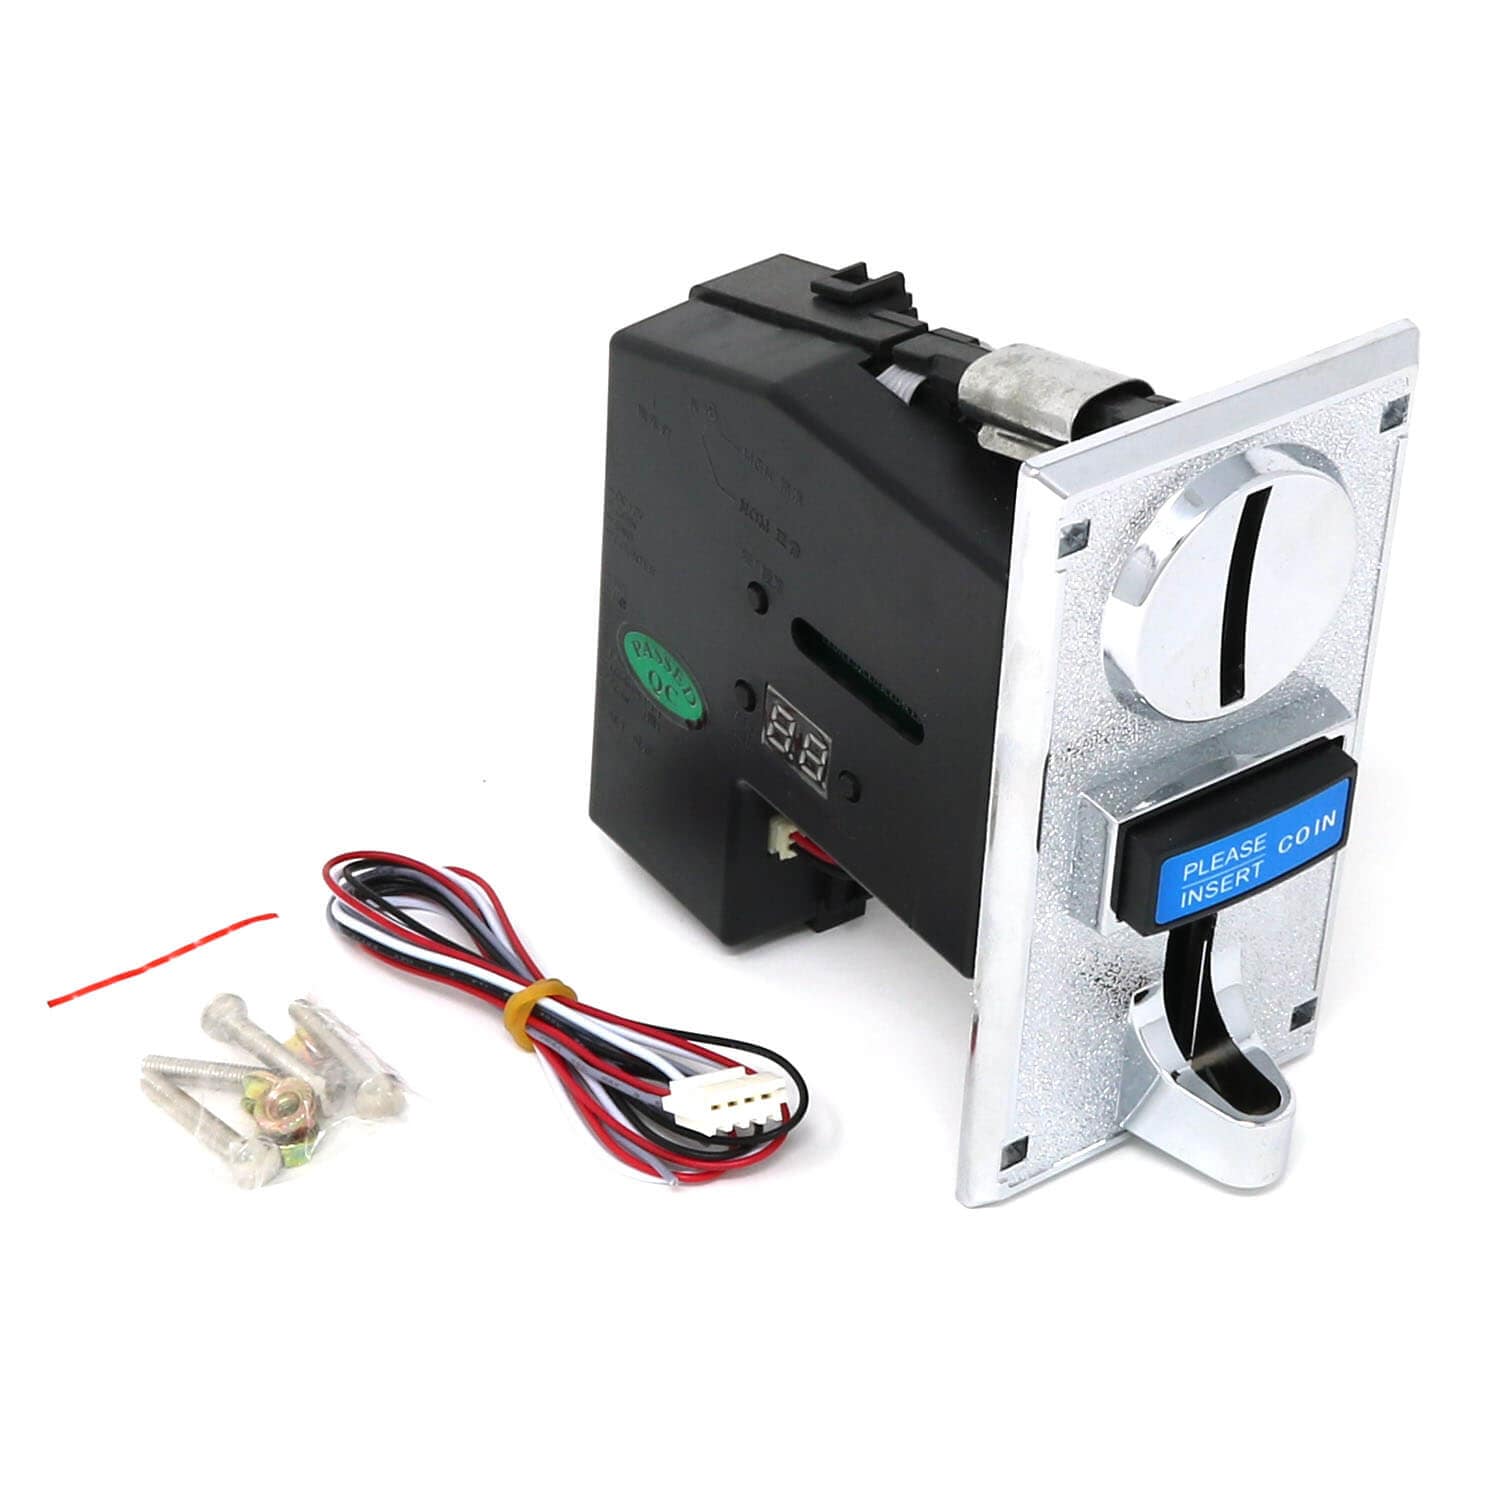 Programmable Coin Acceptor (HX-616) - 6 Coin - The Pi Hut